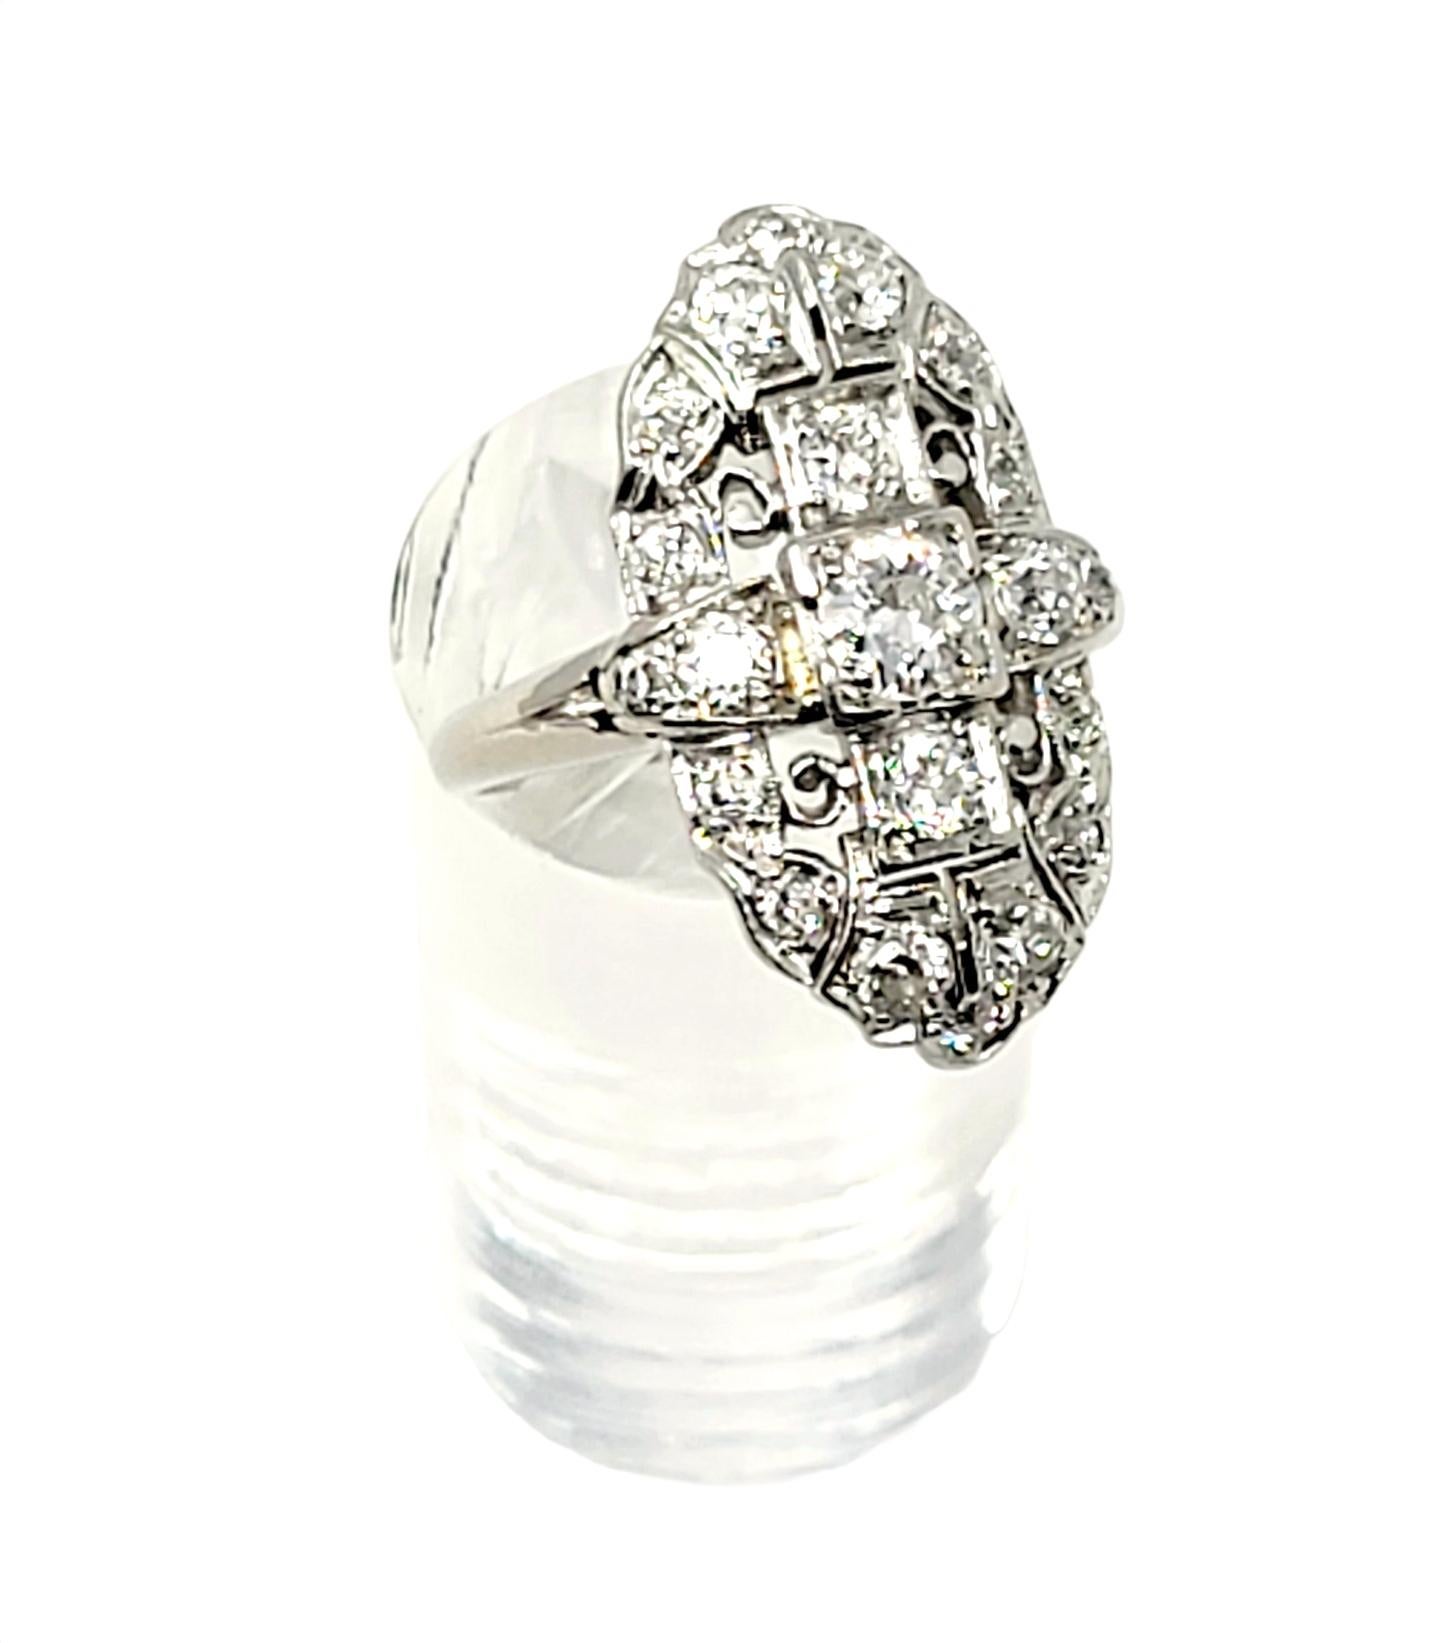 Vintage Old European Cut Diamond Navette Ring in Palladium 1.75 Carats Total For Sale 1